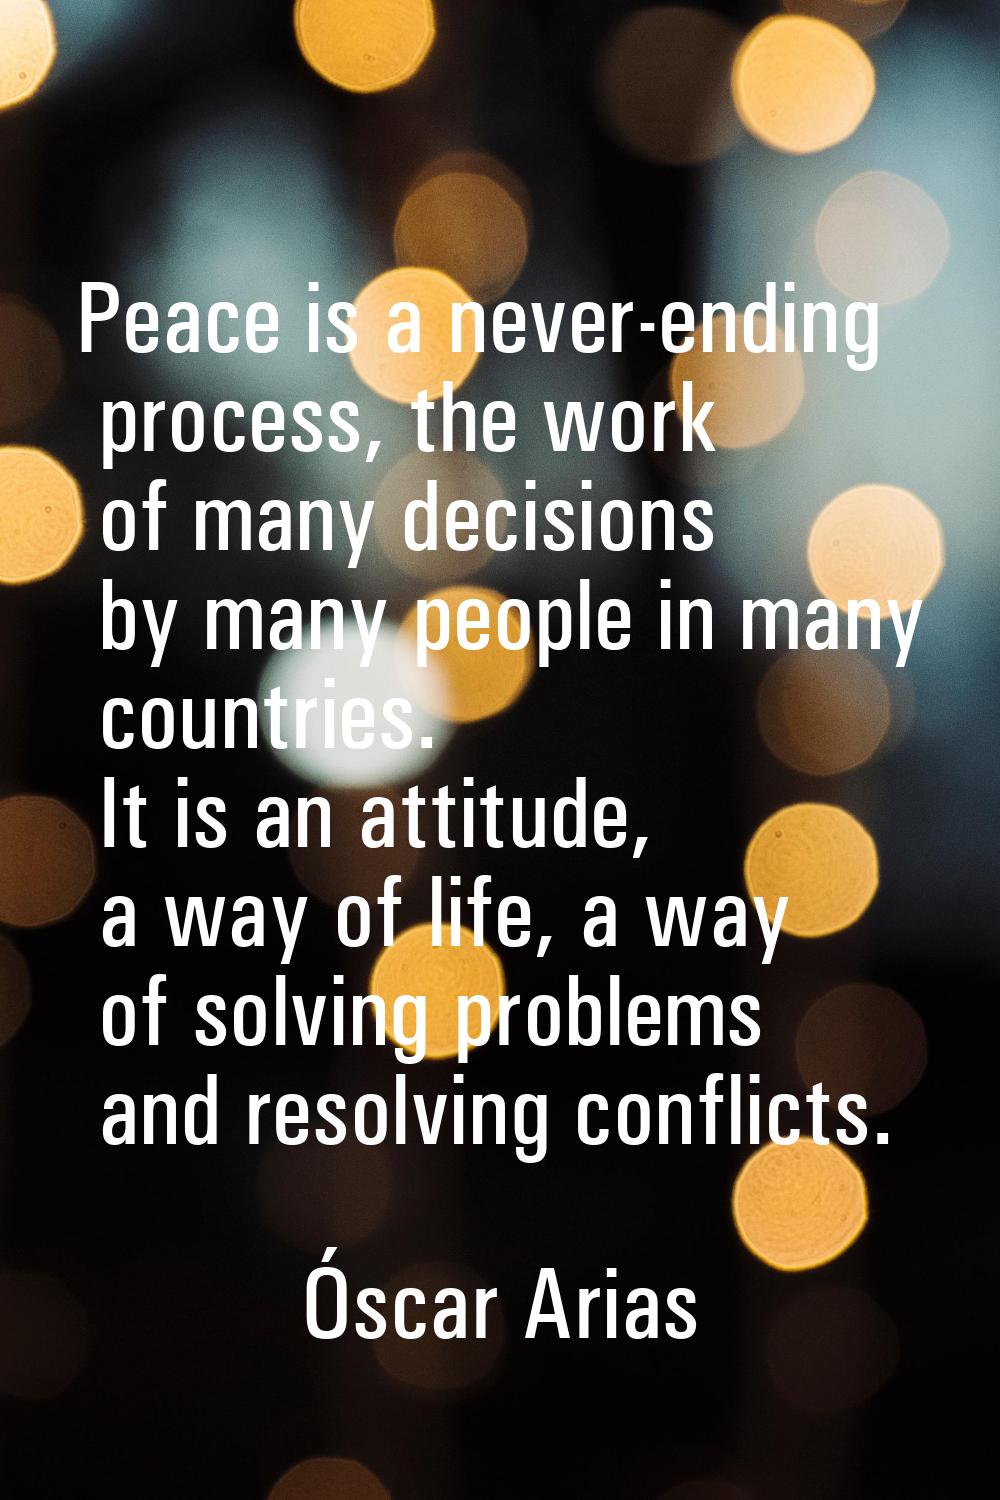 Peace is a never-ending process, the work of many decisions by many people in many countries. It is